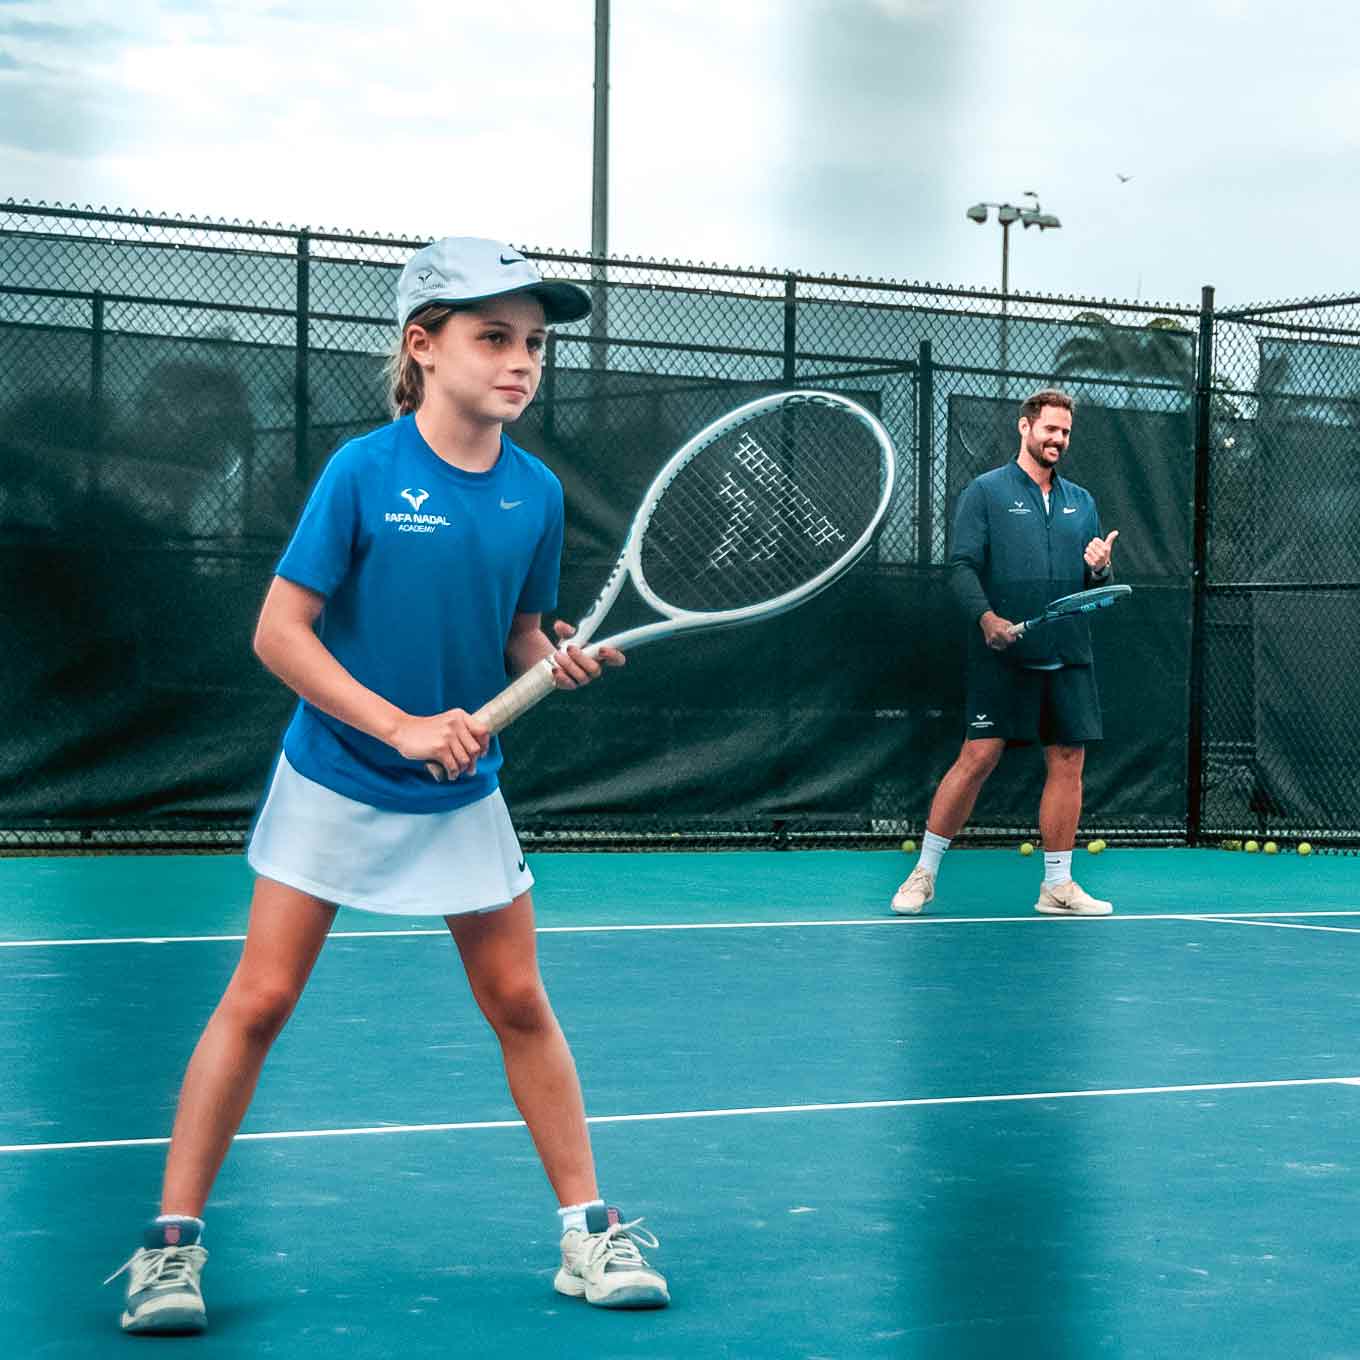 New dates and cities for the Rafa Nadal Academy Camps arranged by Avanza Sports